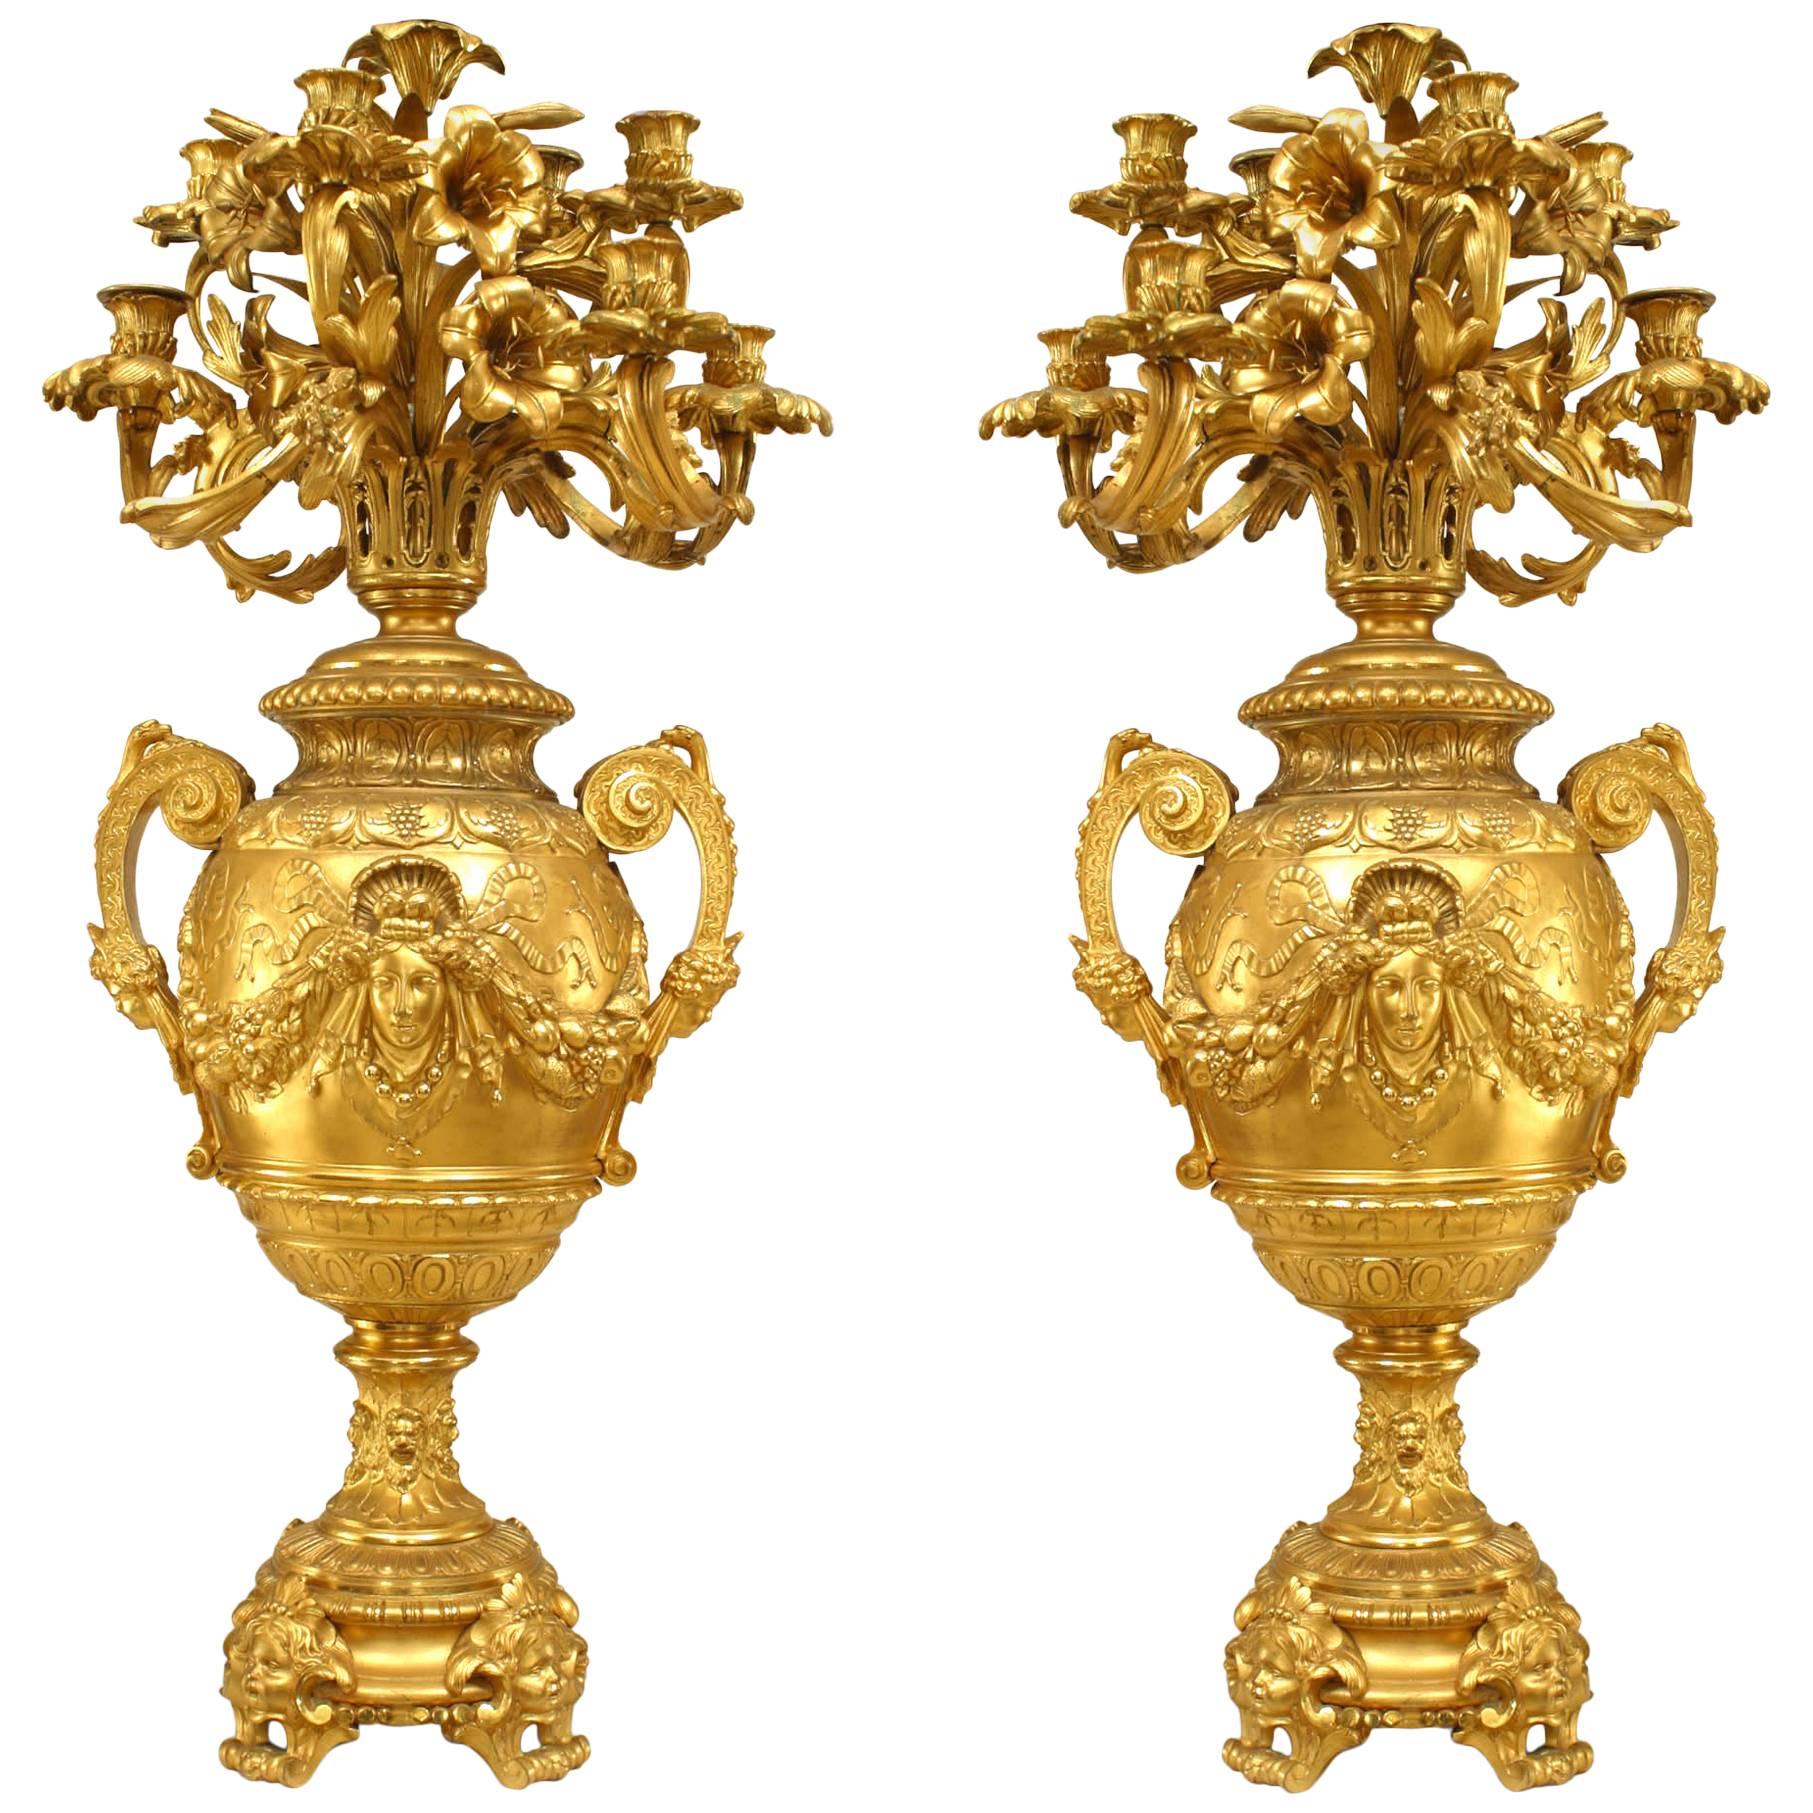 Pair of French Victorian Bronze Dore Urn-Shaped Candelabras